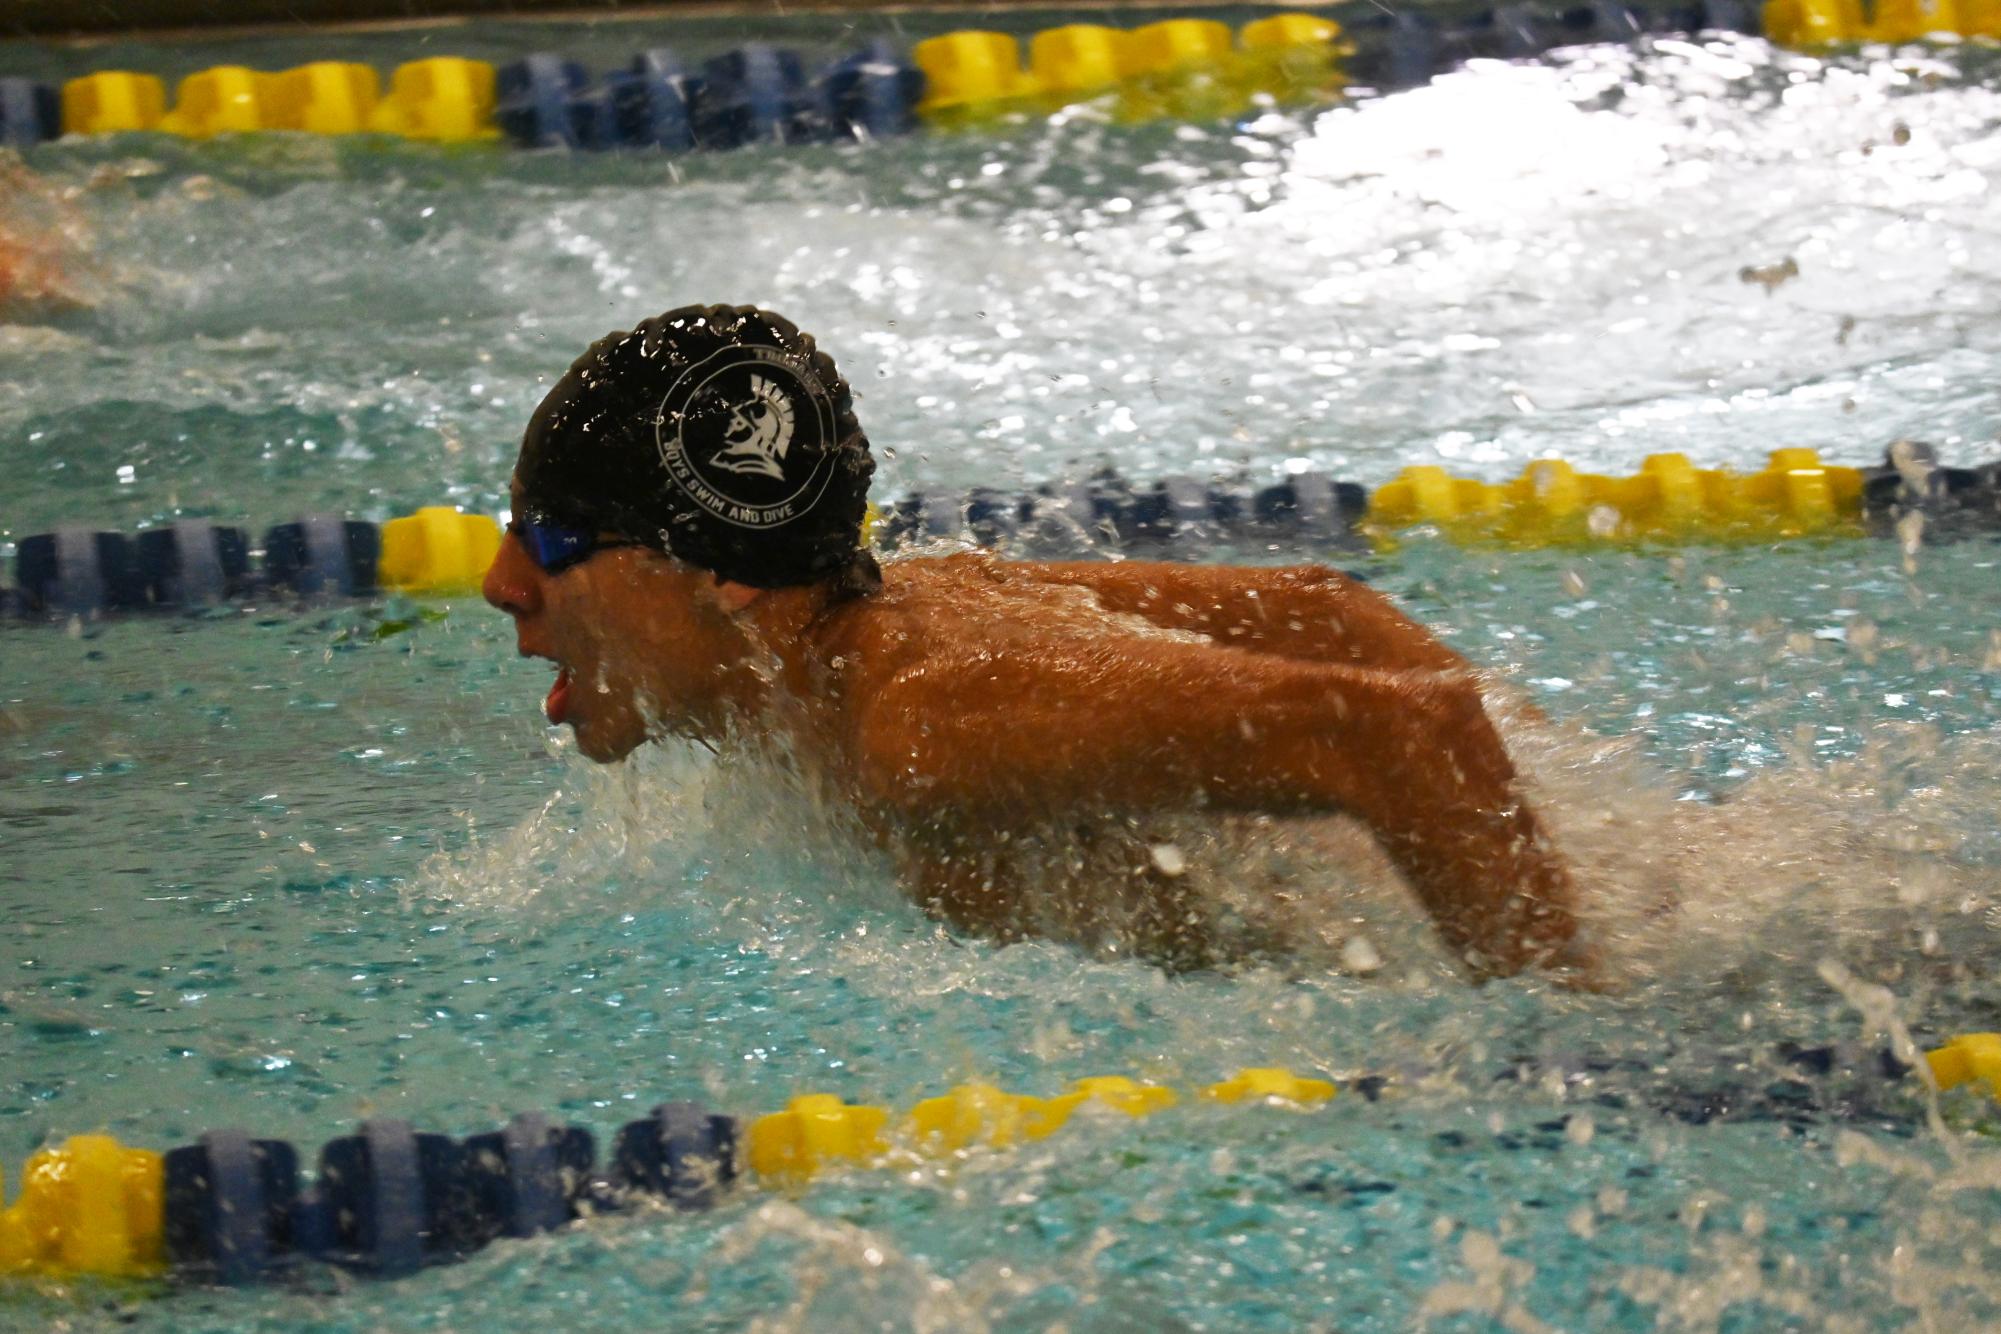 GASP OF AIR. Freshman Sam Galarneault rises up for a breath during the 100 butterfly. He placed fifth.